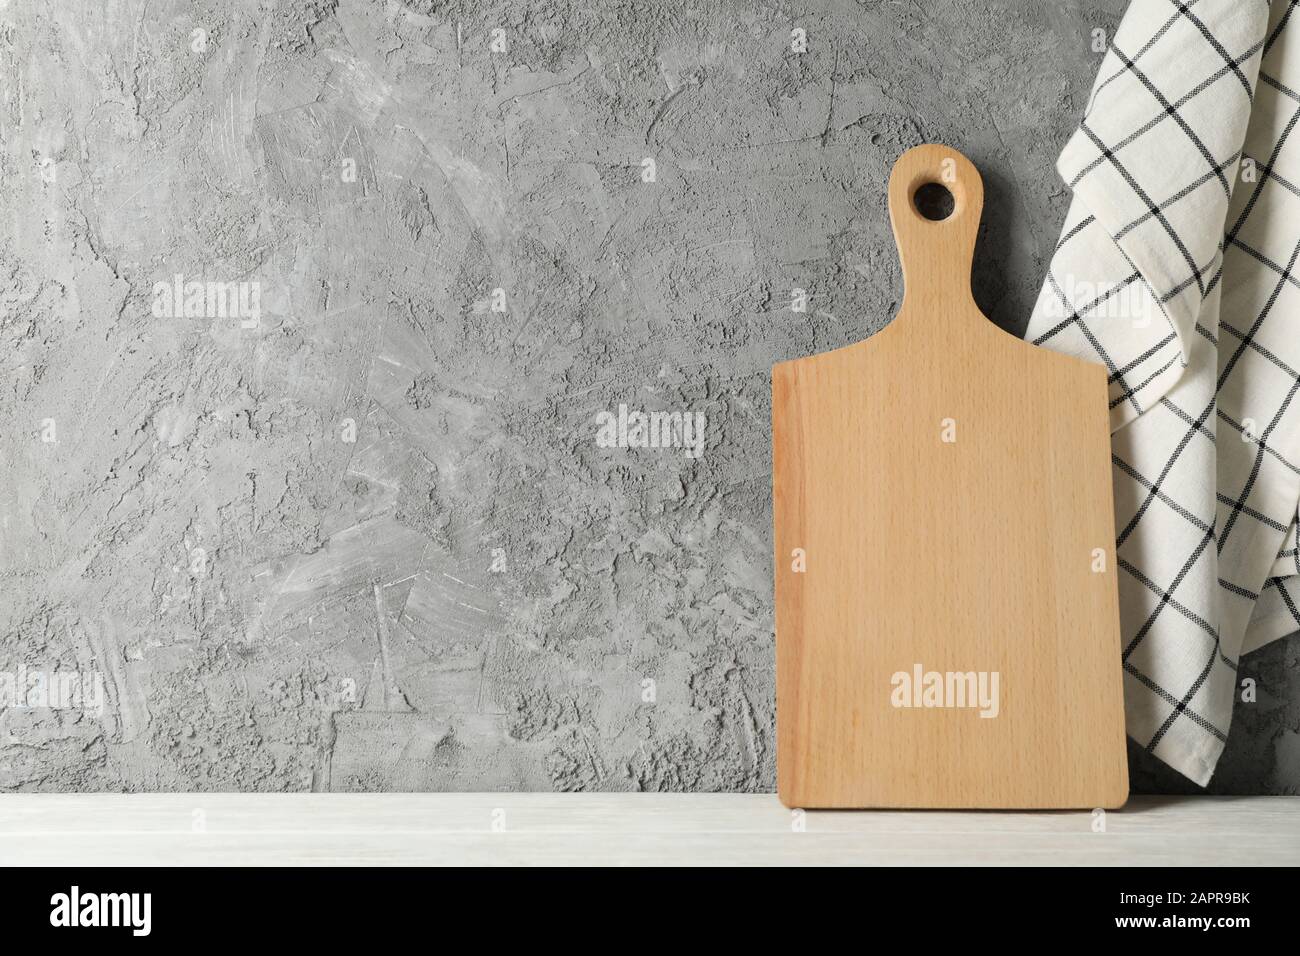 Wooden board on white table against gray background, space for text Stock Photo